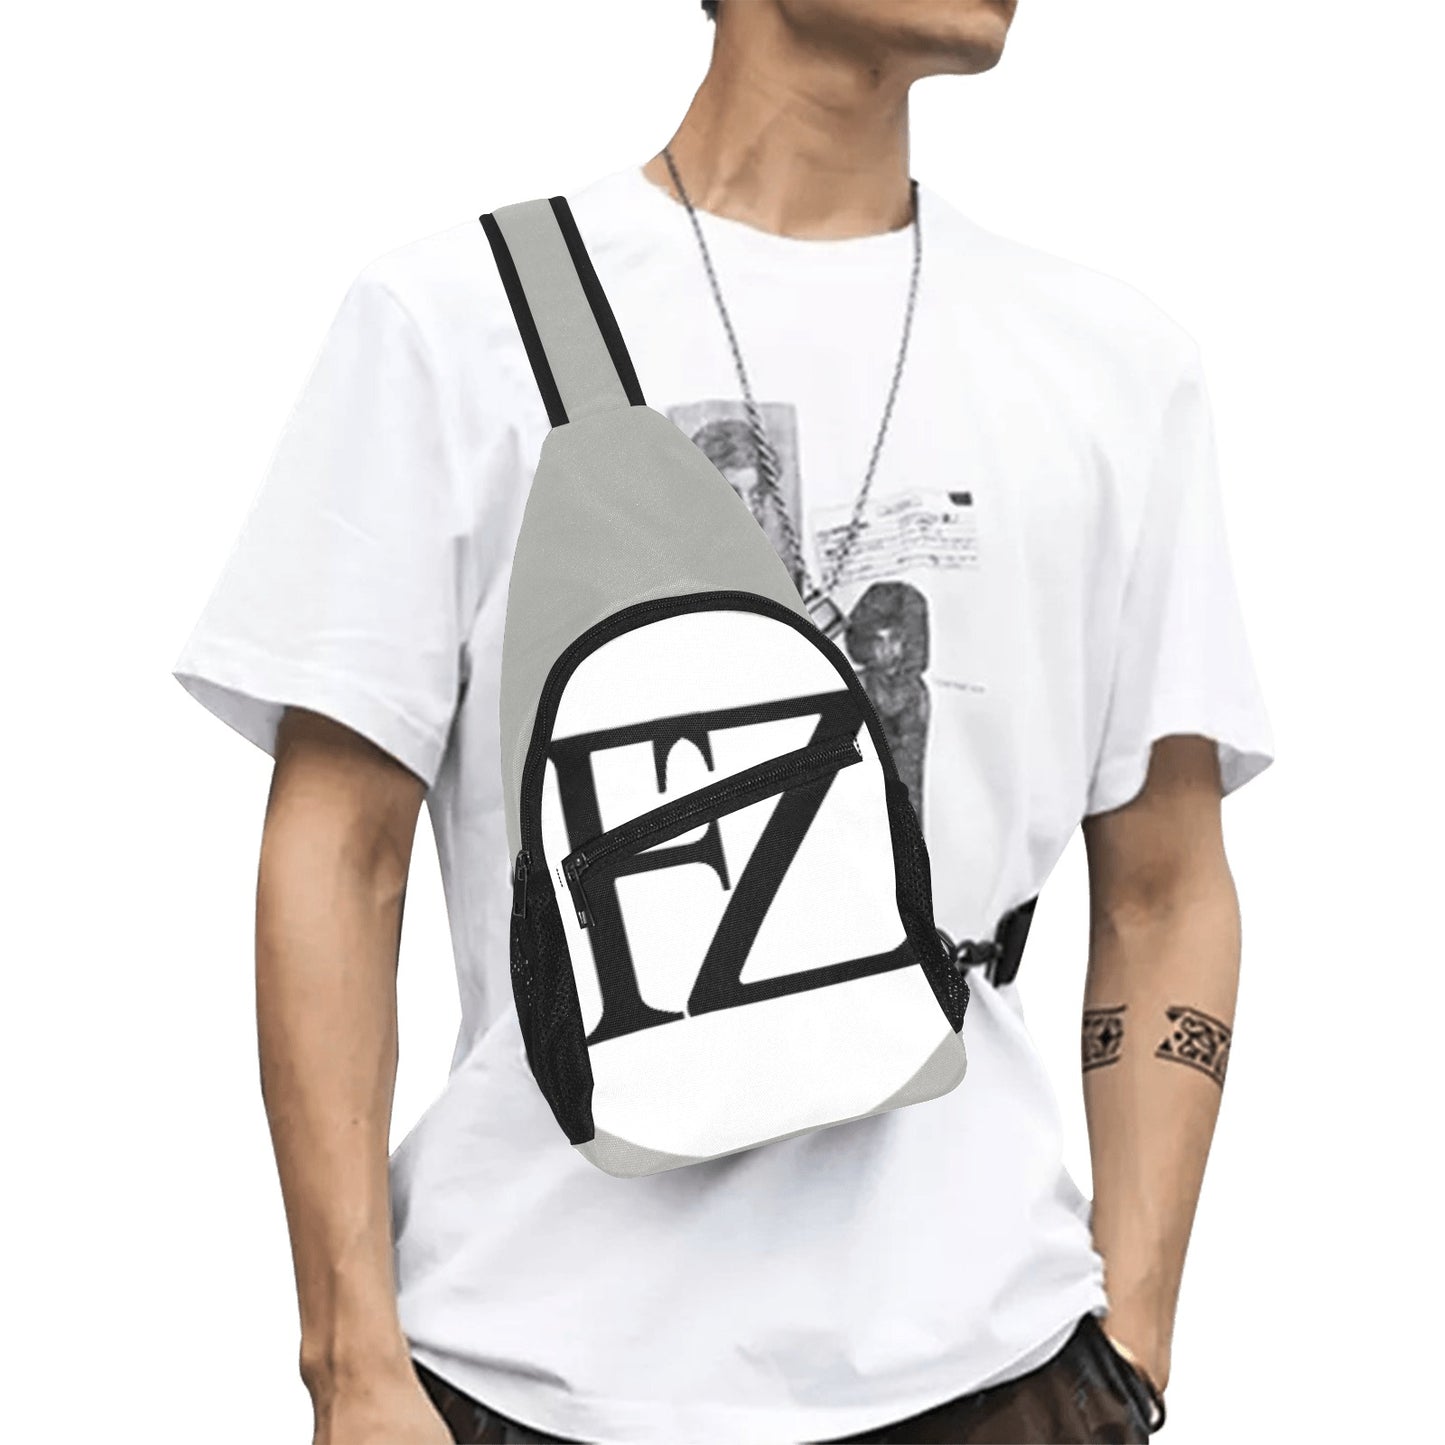 fz men's chest bag too one size / fz men's chest bag too-grey all over print chest bag(model1719)